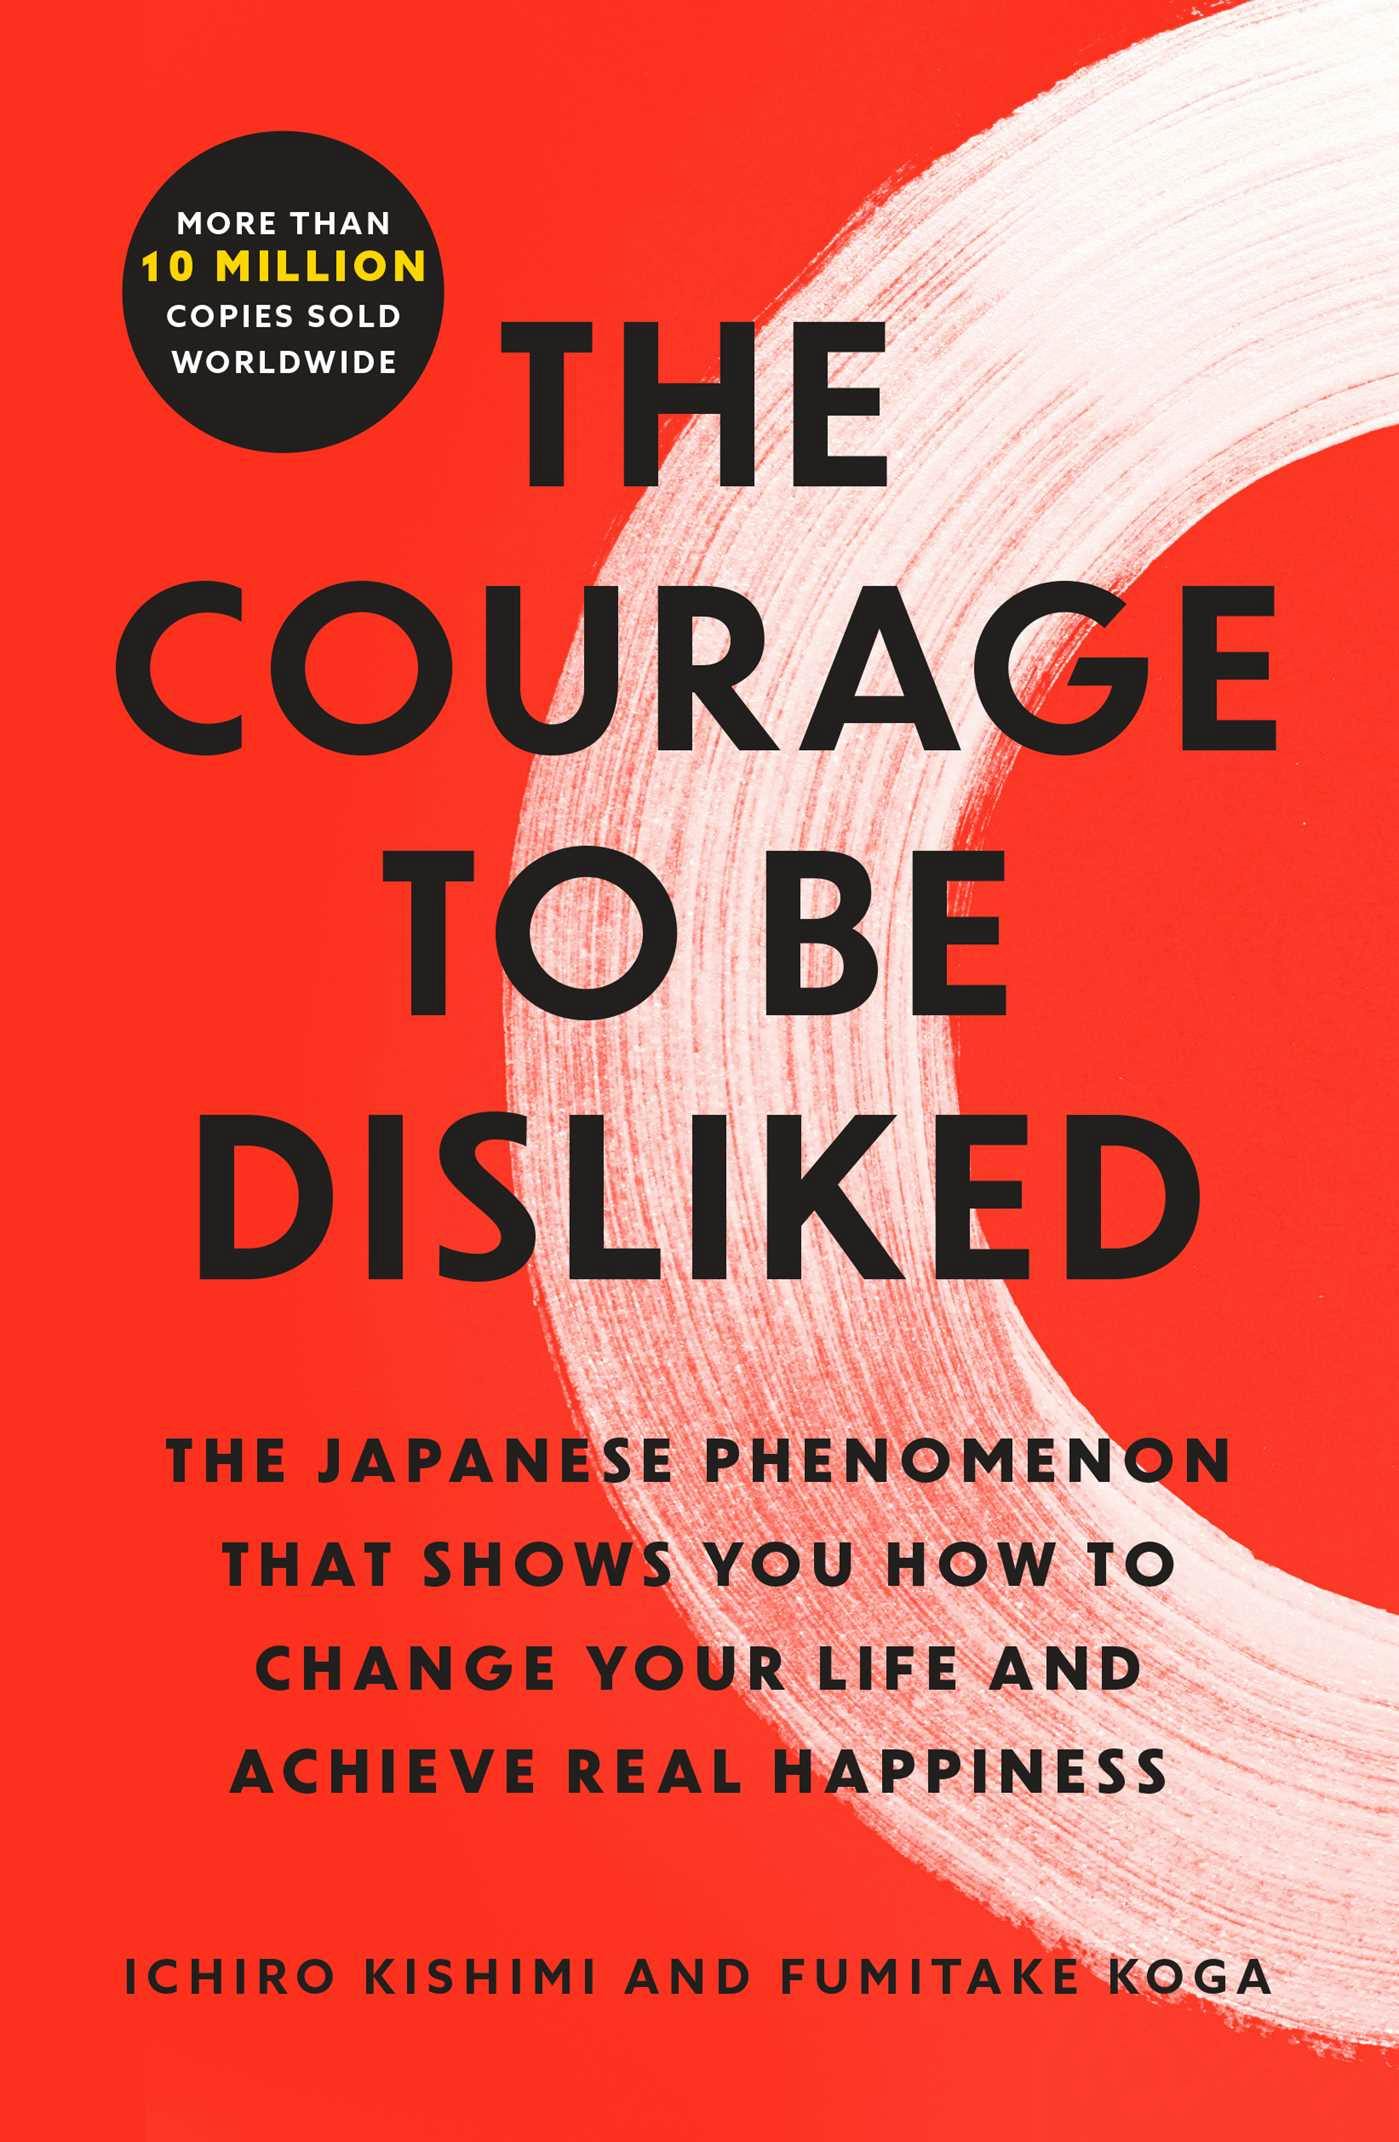 The Courage to Be Disliked: The Japanese Phenomenon That Shows You How to Change Your Life and Achieve Real Happiness - Ichiro Kishimi, Fumitake Koga